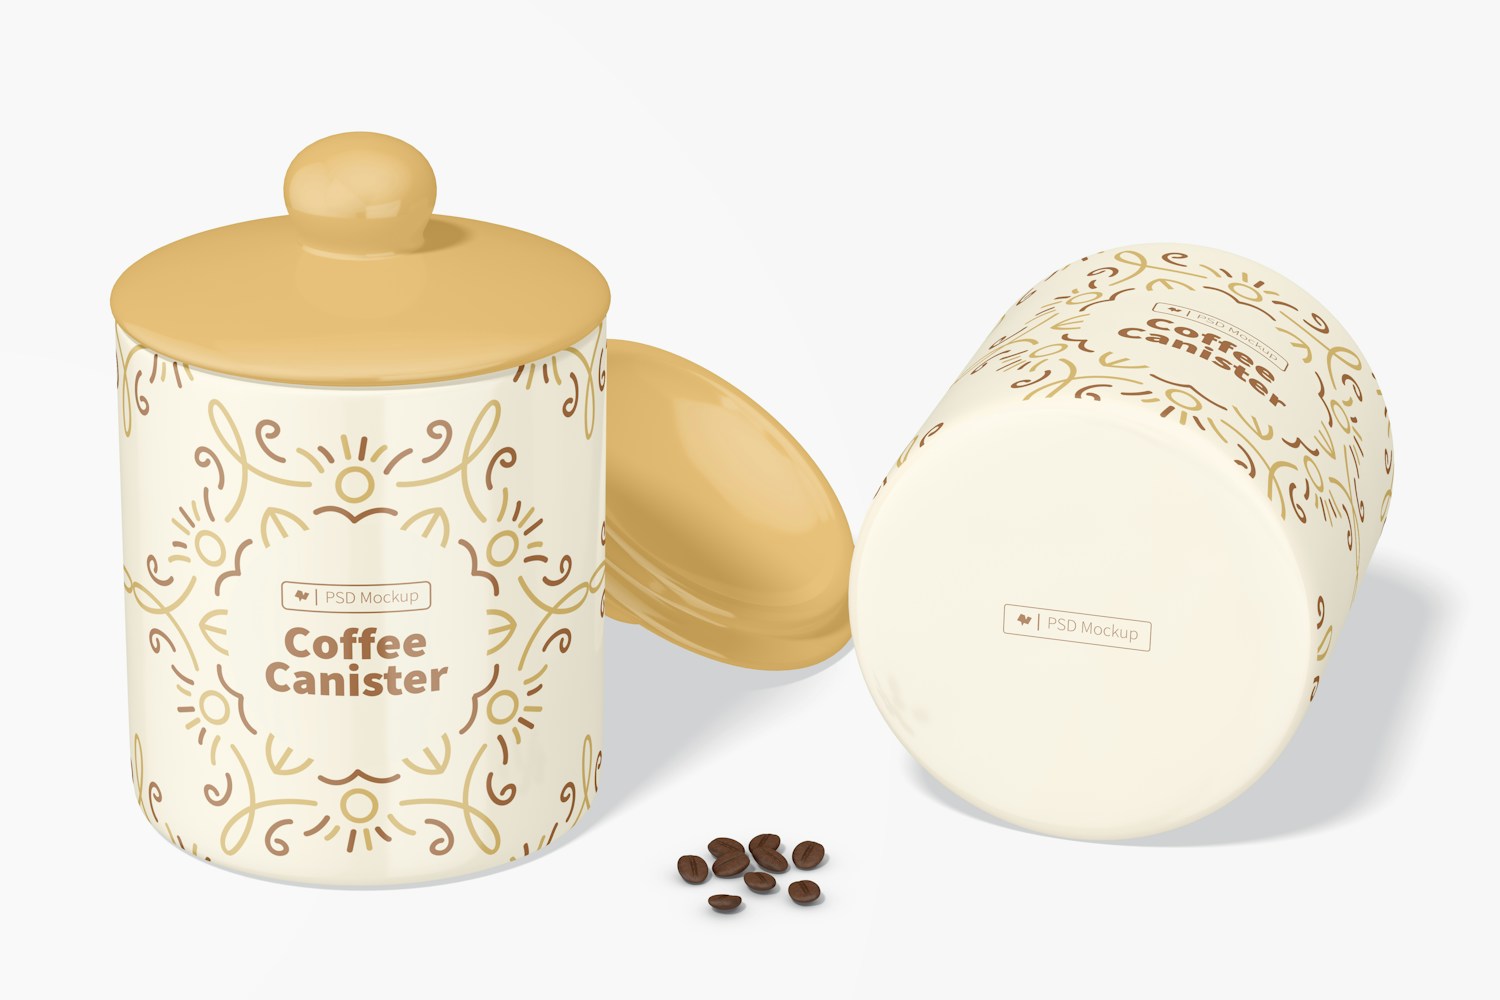 Coffee Canisters Mockup, Standing and Dropped